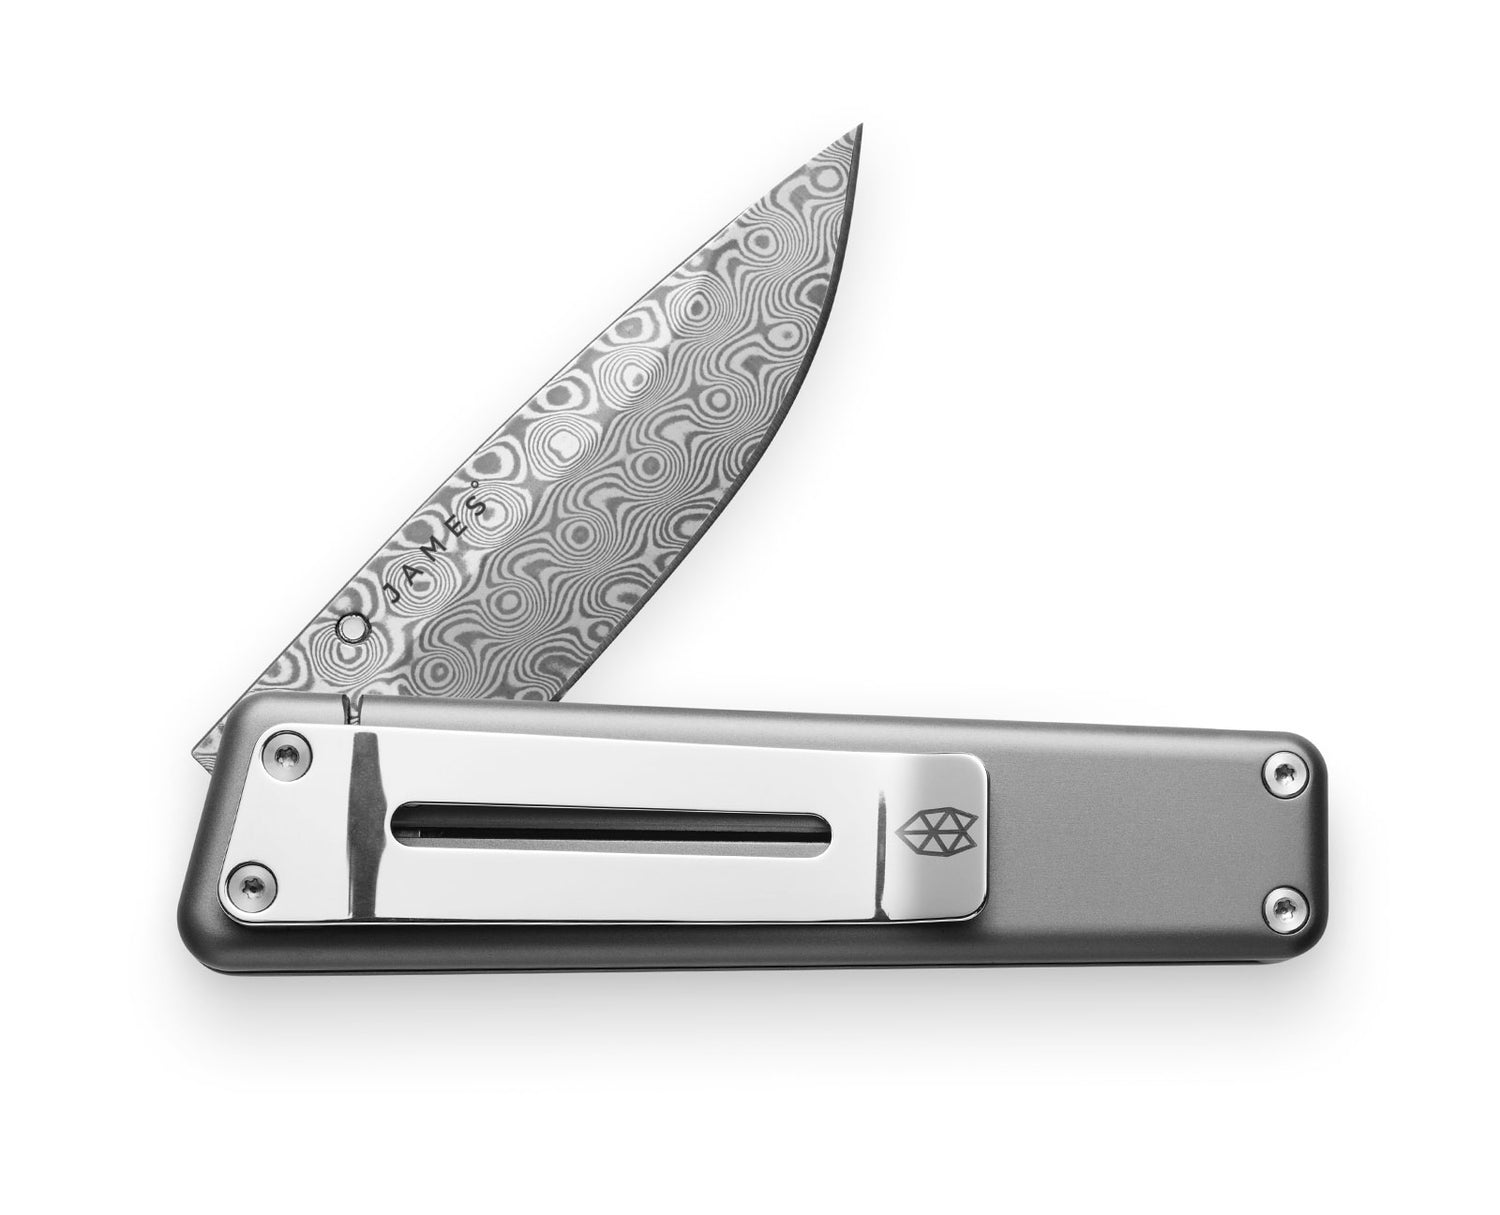 The Chapter knife with titanium handle and decorative, stainless steel blade.